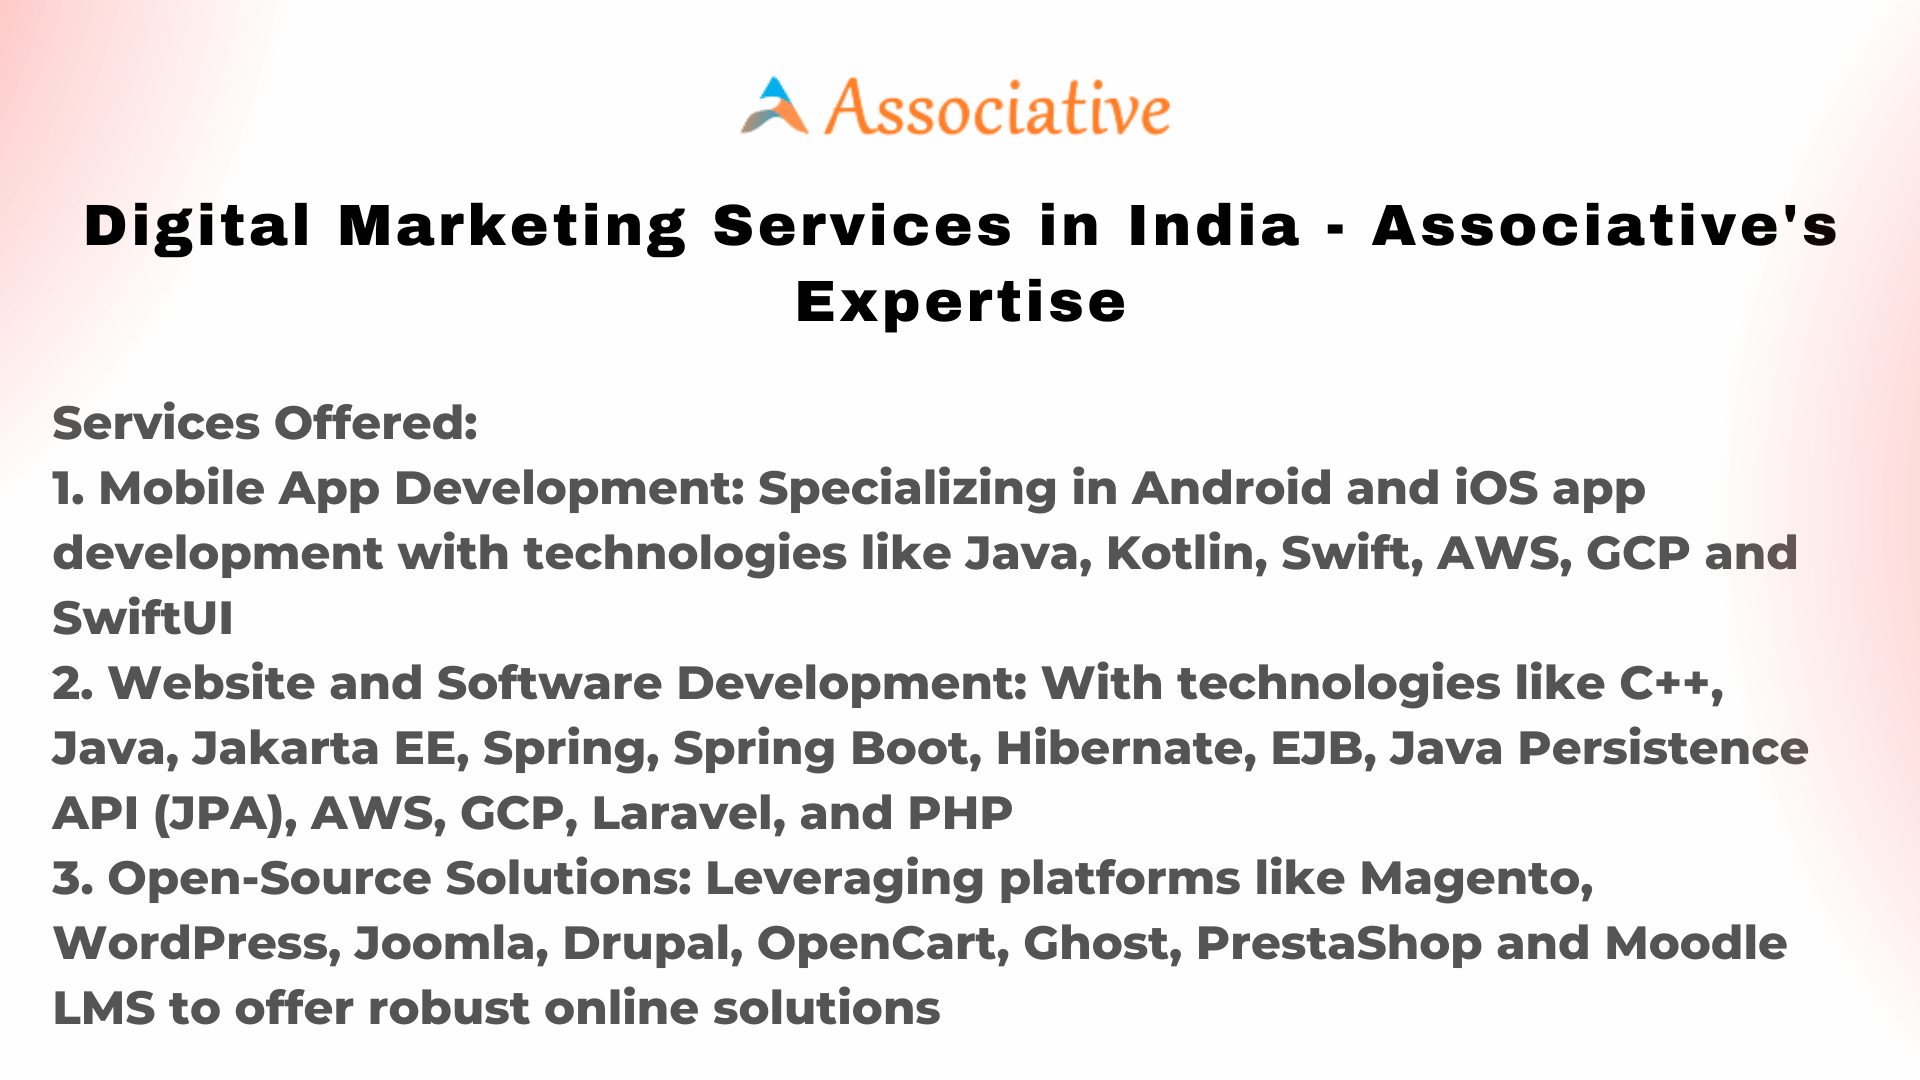 Digital Marketing Services in India Associative's Expertise